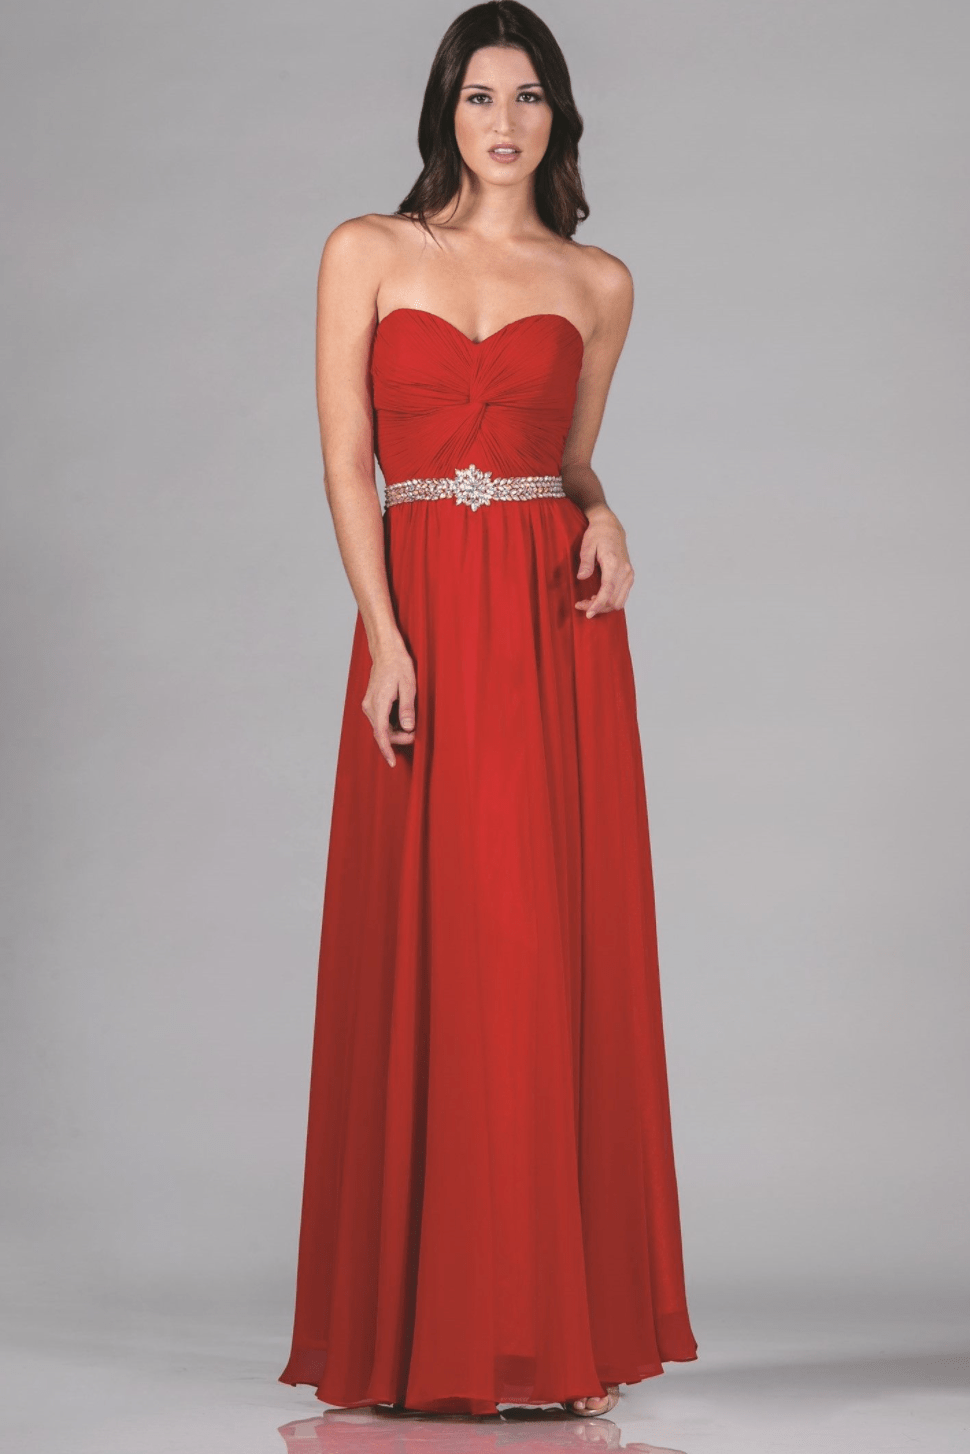 Strapless Beaded Belt Long Dress by Ladivine - NORMA REED